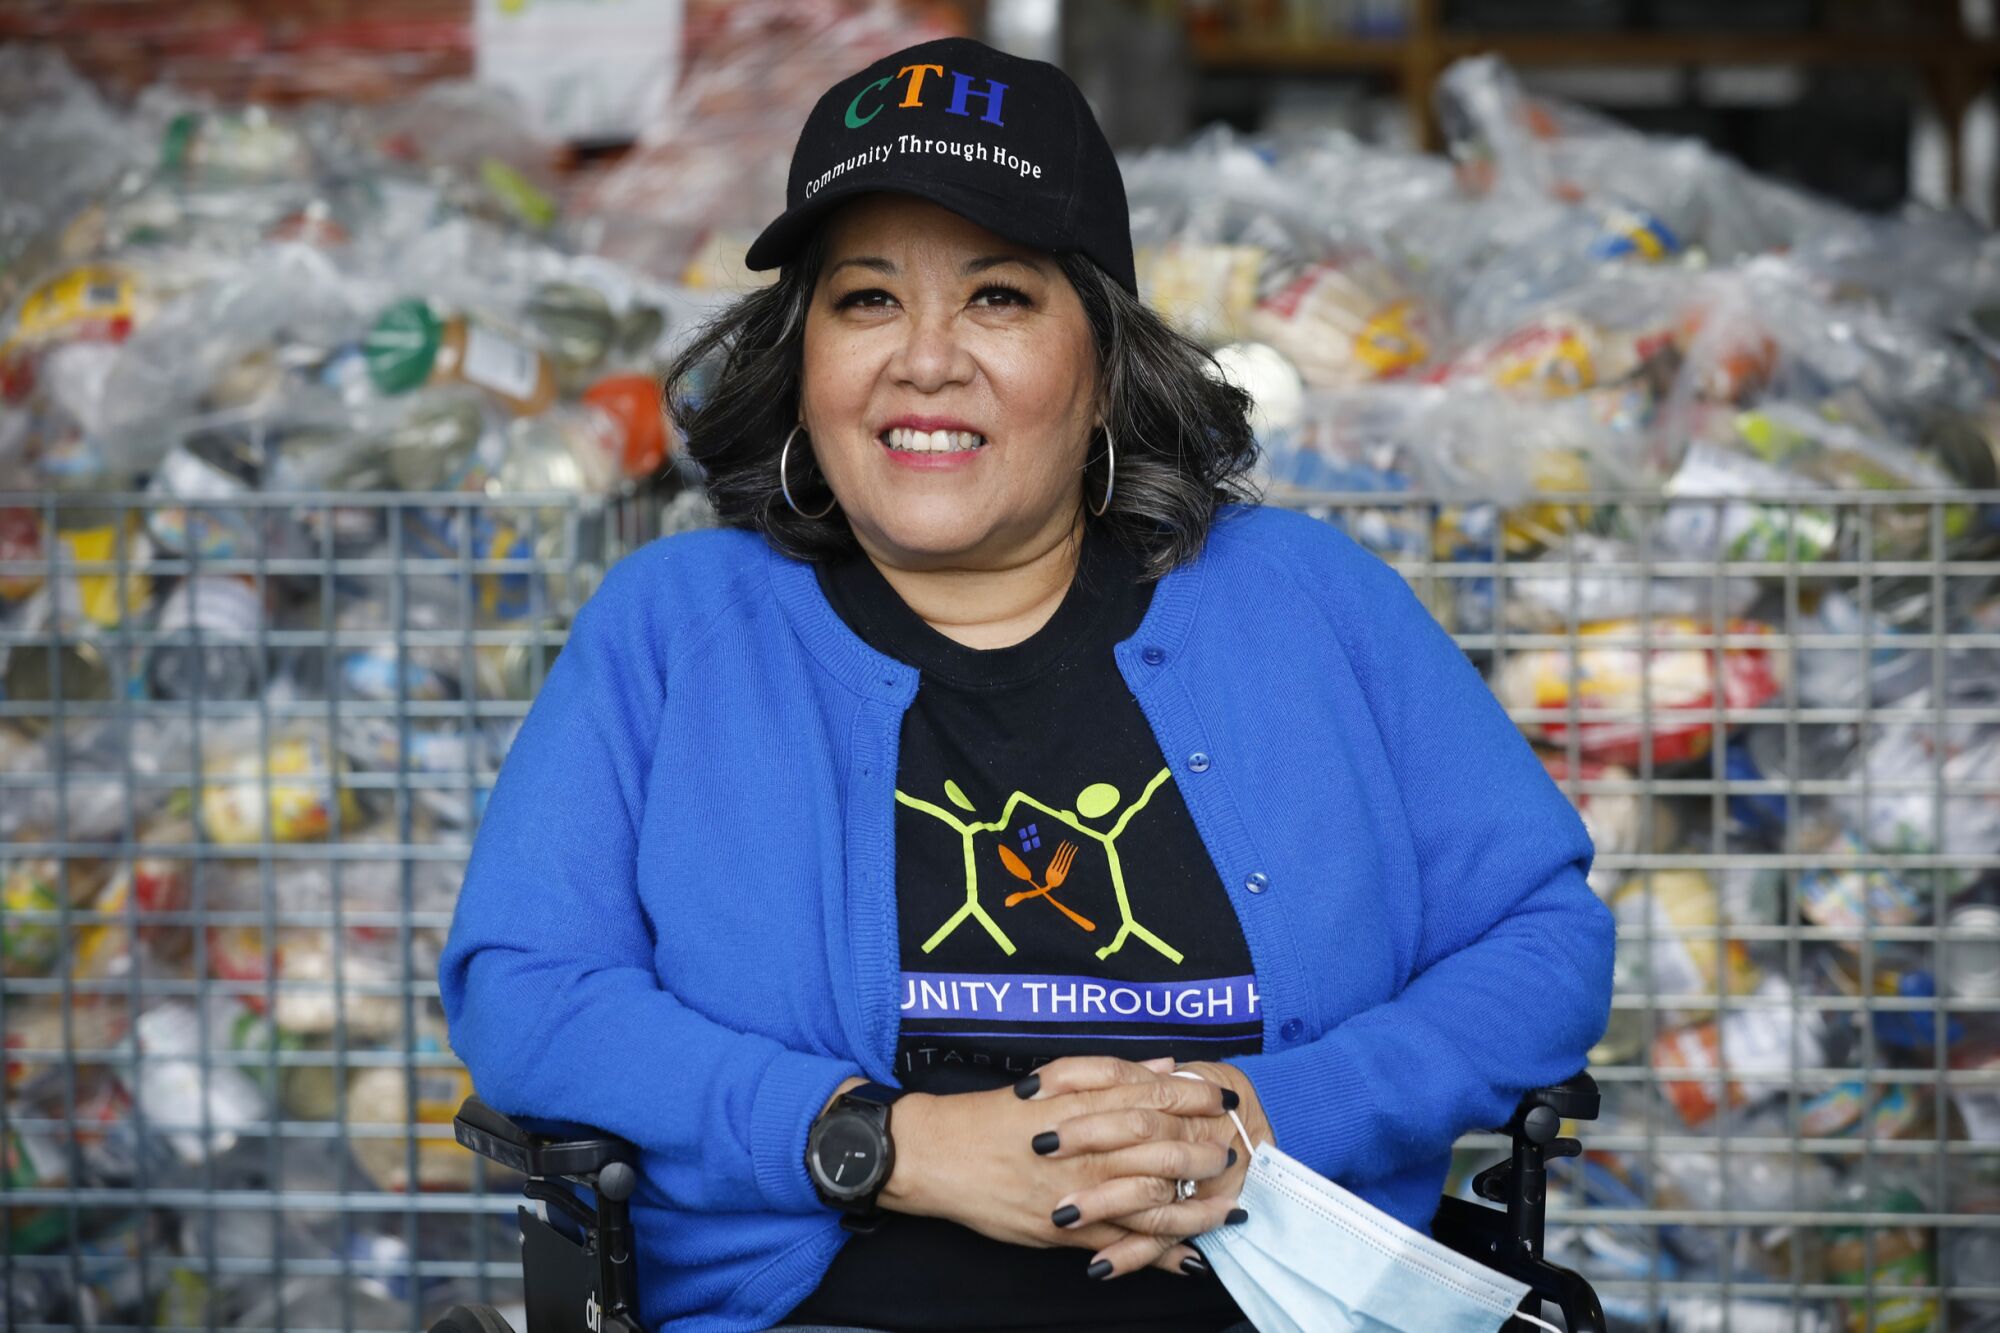  Rosy Vasquez, the executive director of Community Through Hope, is photographed in the CTH warehouse